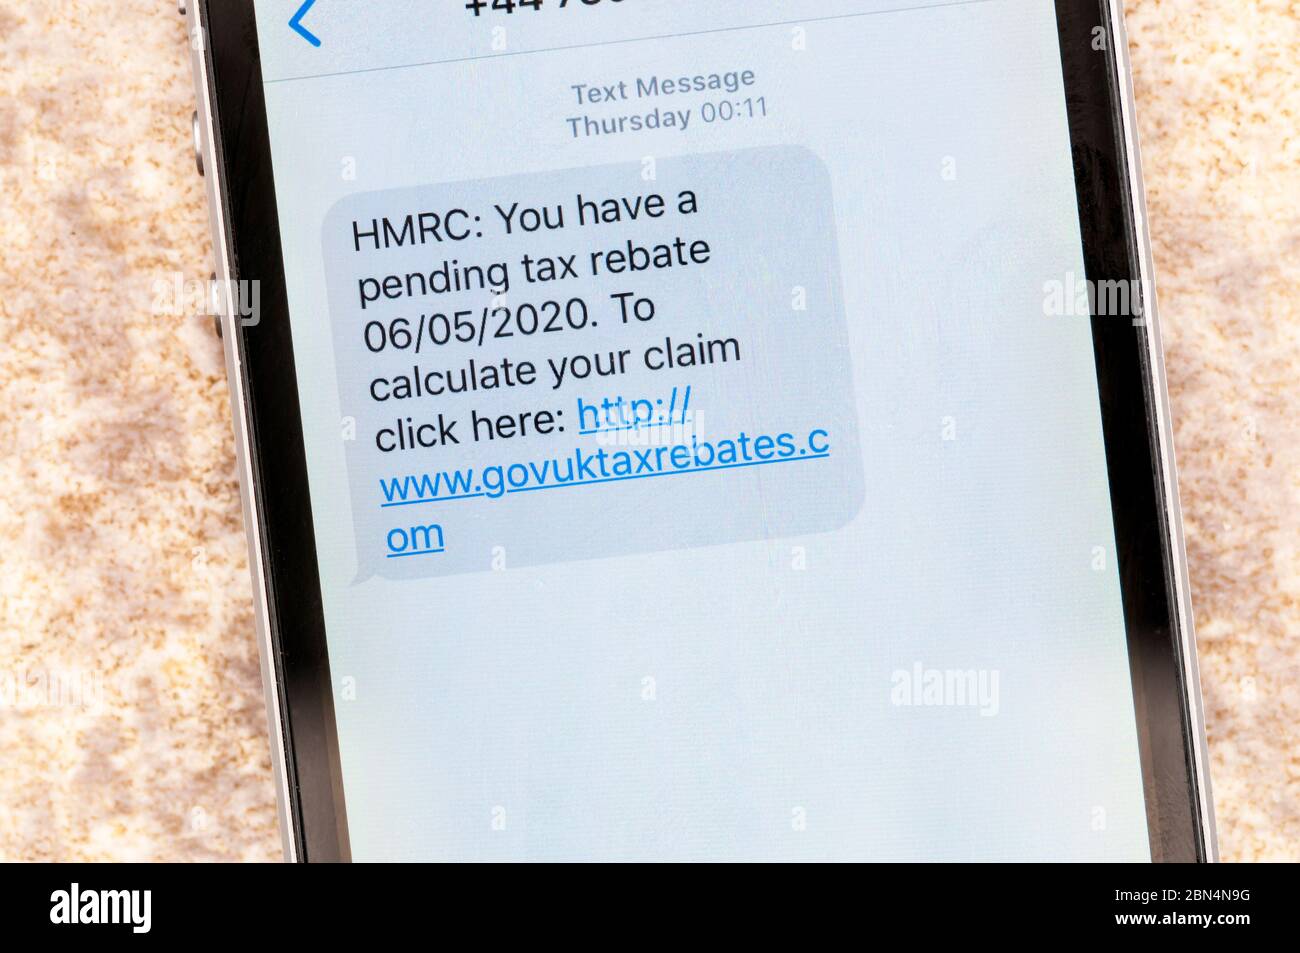 A scam message displayed on an iphone that pretends to be from HMRC with a pending tax rebate. Stock Photo